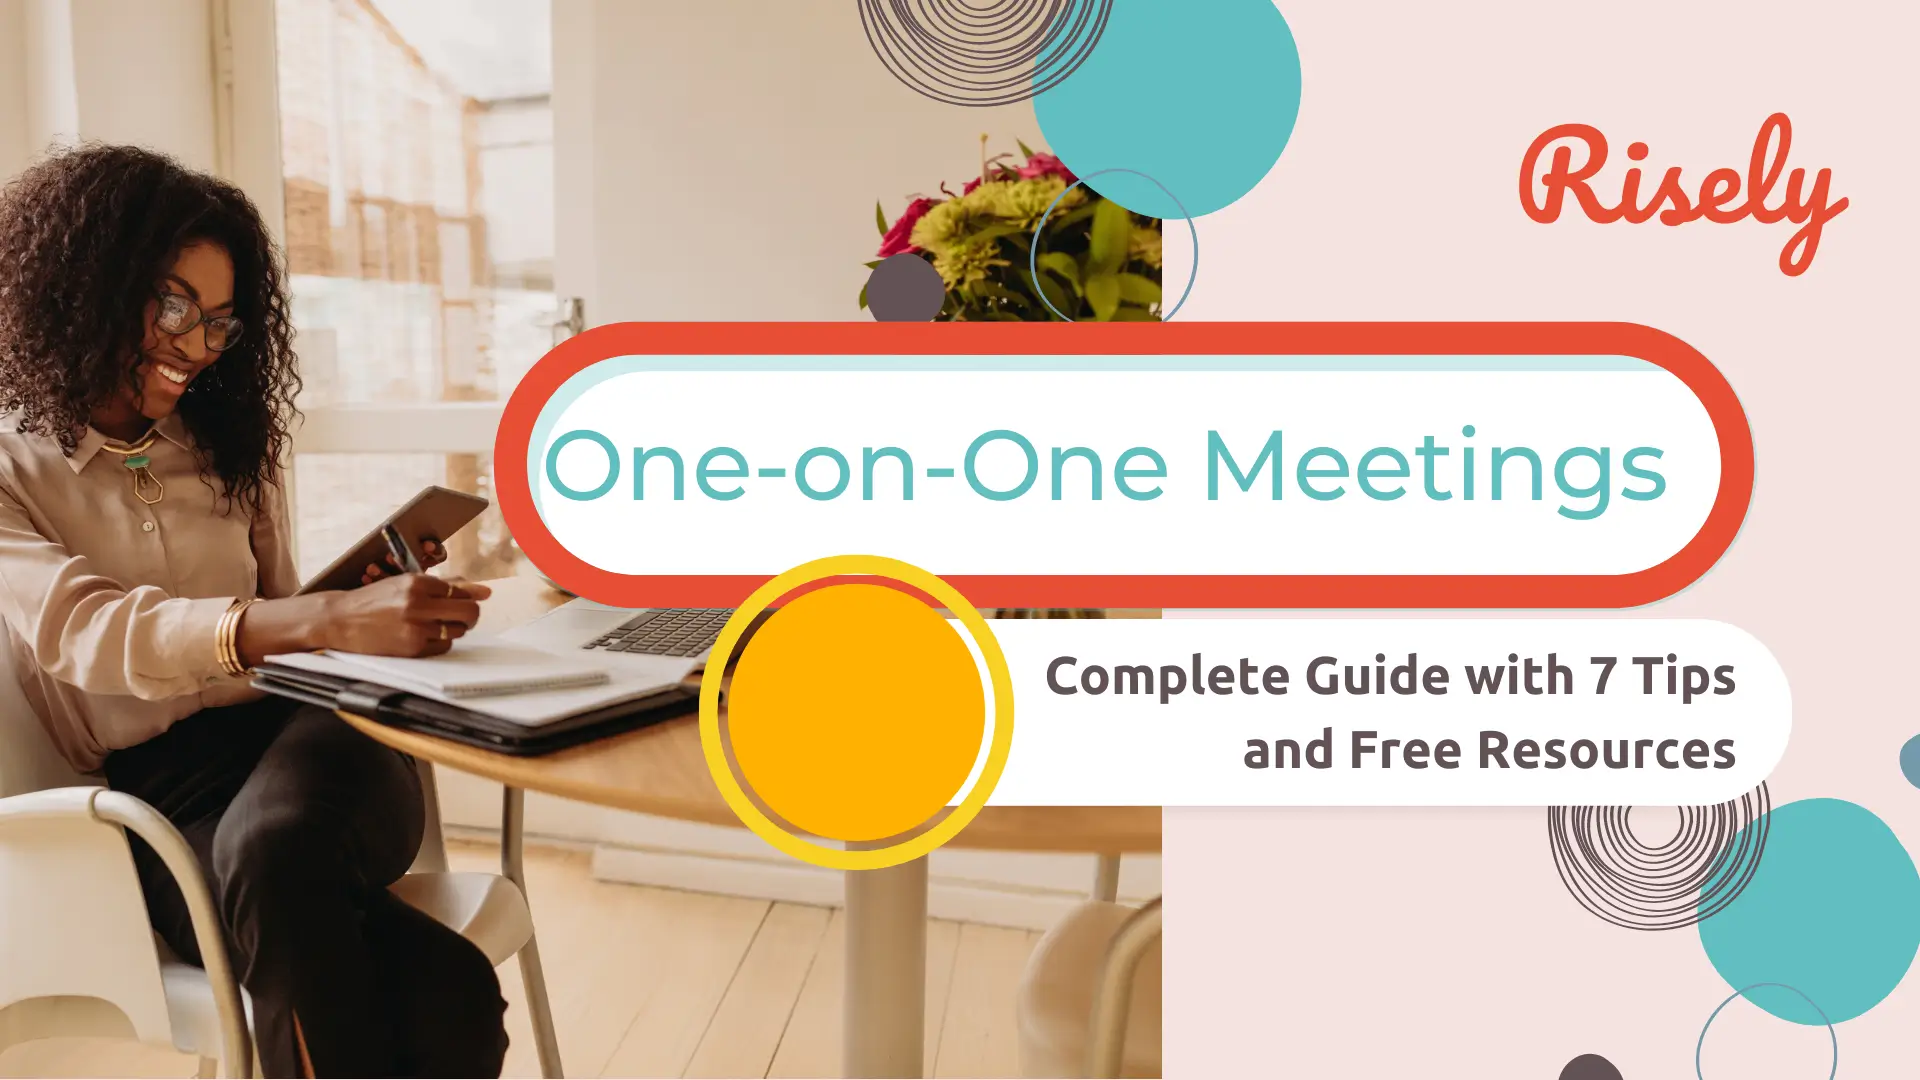 One-on-One Meetings: Complete Guide with 7 Tips and Free Resources